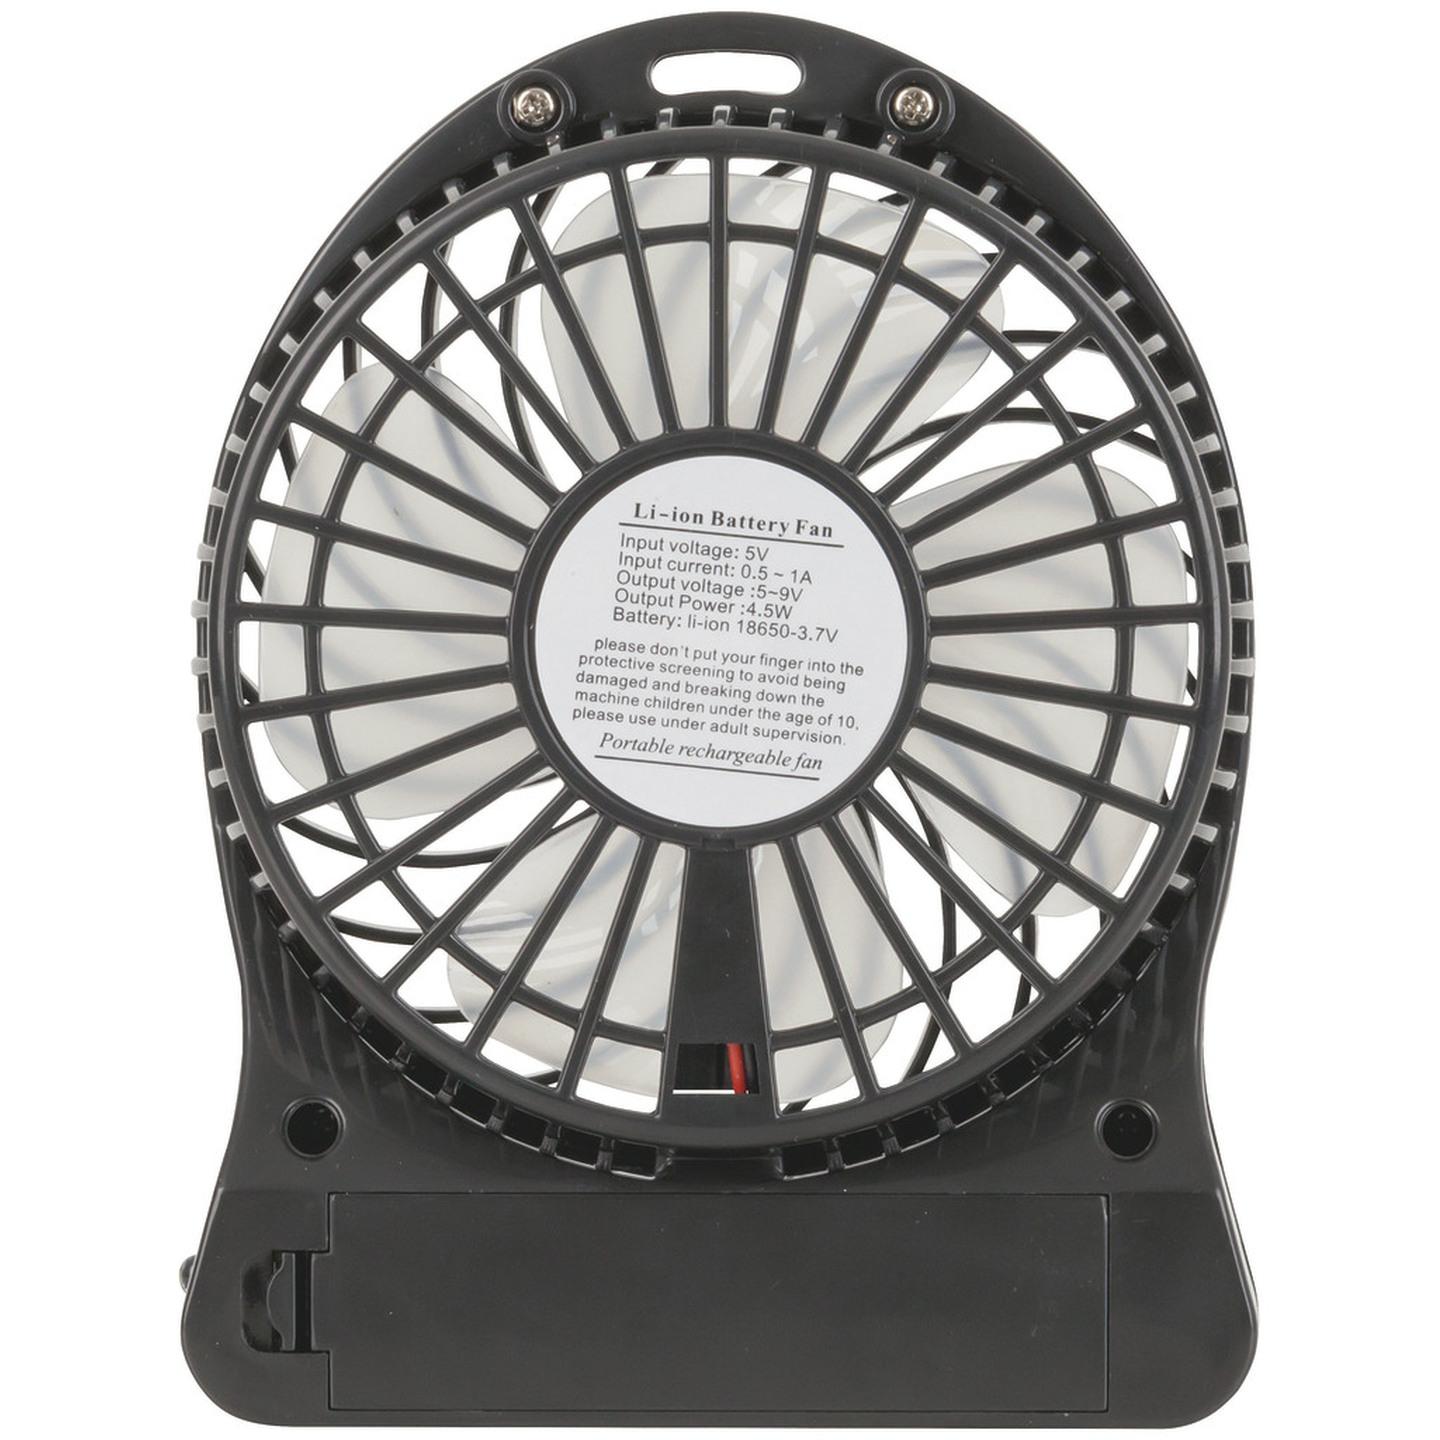 Mini USB Rechargeable 3 Speed Fan with LED Light - Black